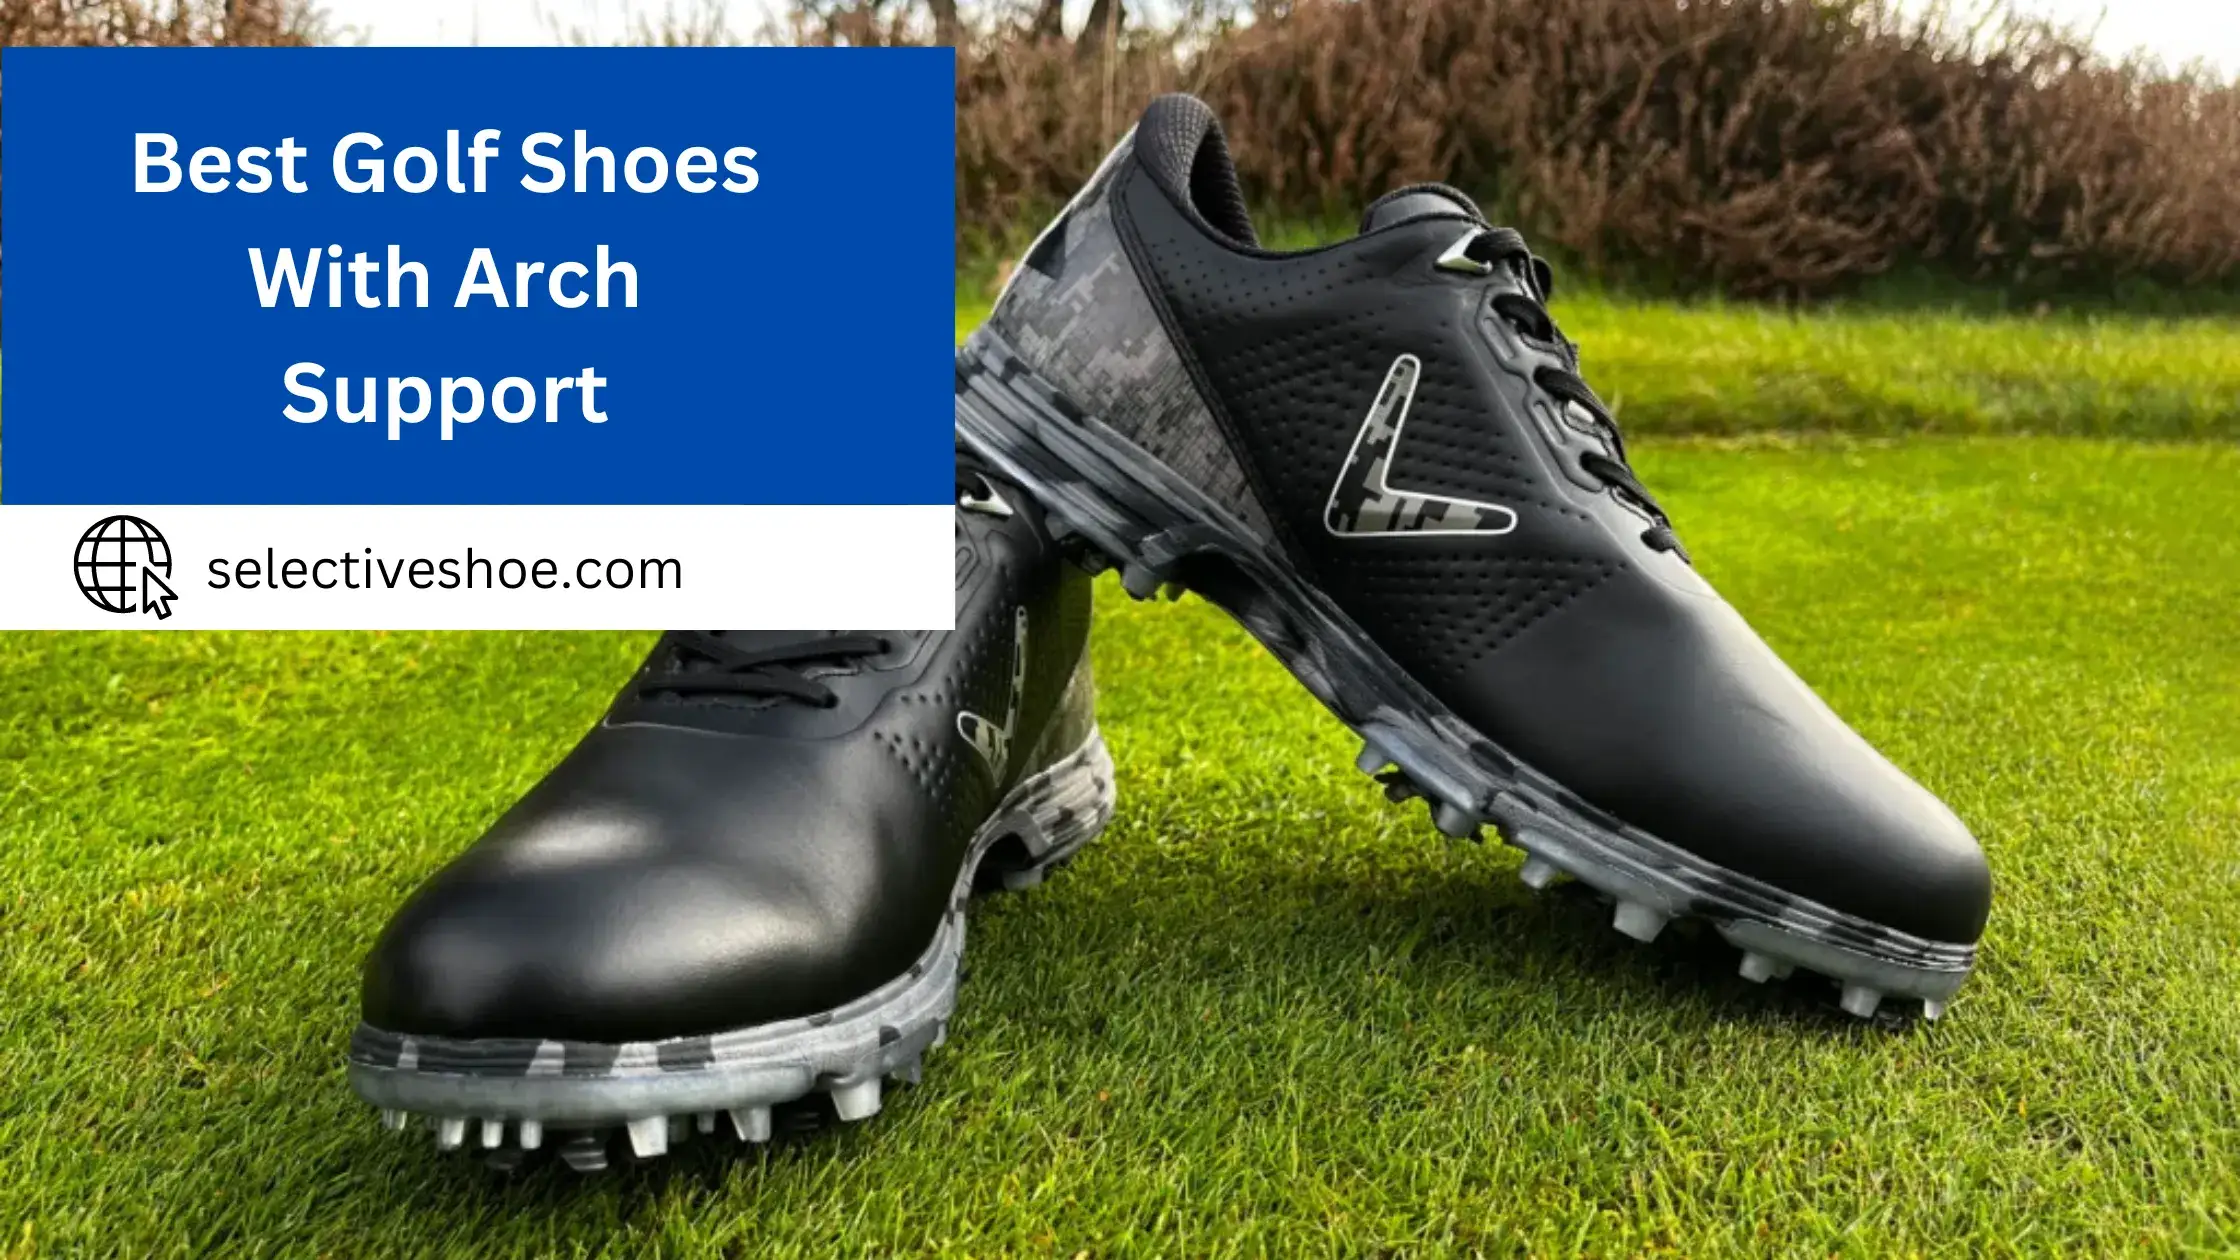 Best Golf Shoes With Arch Support - (An In-Depth Guide)